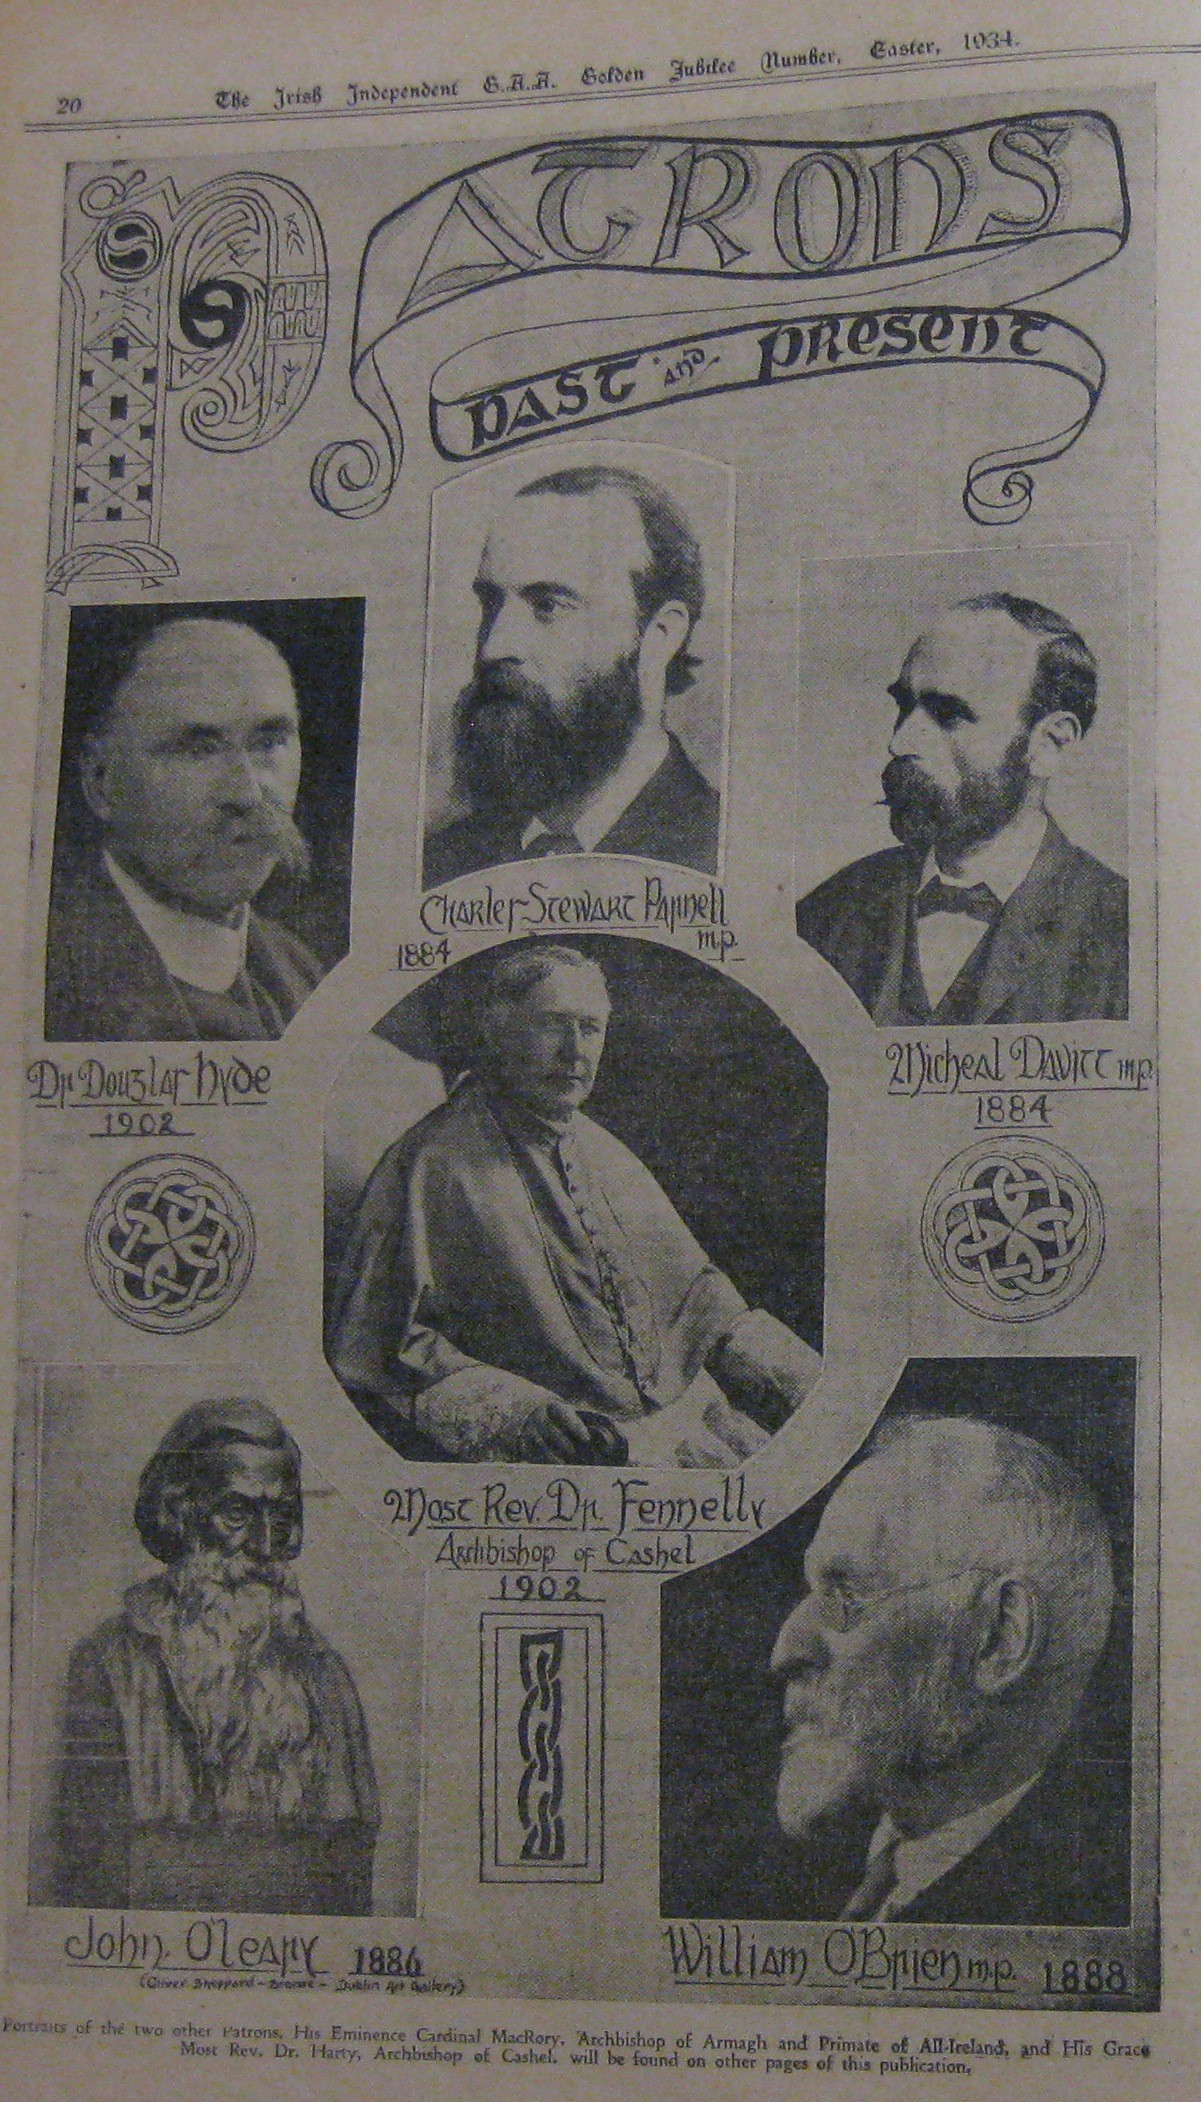 Images of a number of the patrons of the GAA prior to 1934. All of the six patrons featured, with the exception of Archbishop Fennelly, were prominent Irish political leaders.